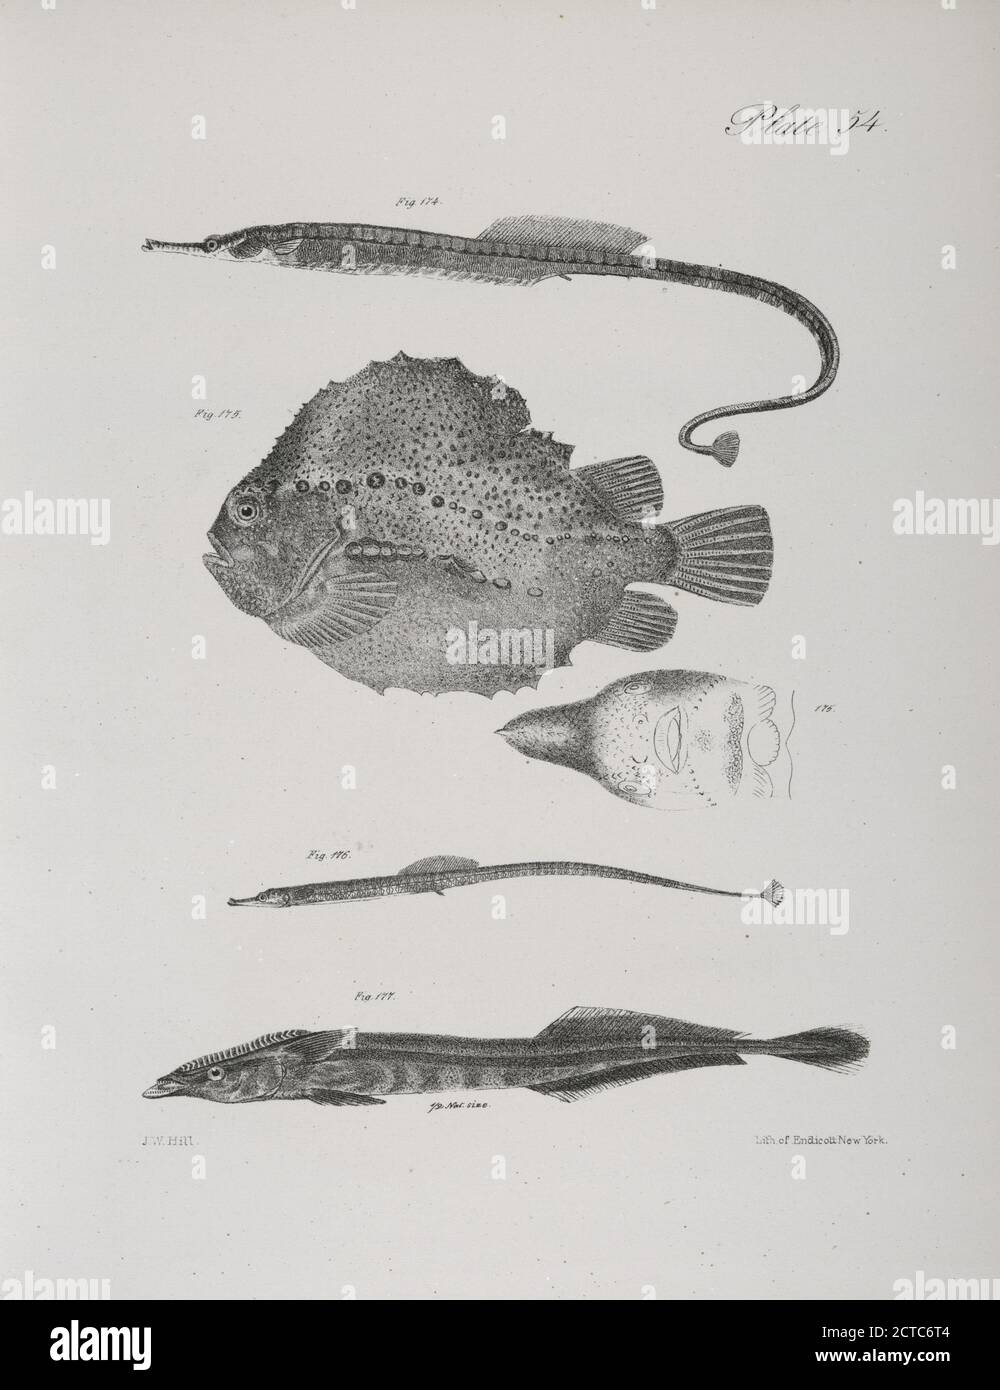 174. The Banded Pipe-fish (Syngnathus fasciatus). 175. The Lump-fish (Lumpus anglorum). View of the under side of the same. 176. The Green Pipe-fish (Syngnathus viridescens). 177. The White-tailed Remora (Echeneis albicauda)., still image, Prints, 1842 - 1844, De Kay, James E. (James Ellsworth), 1792-1851 Stock Photo